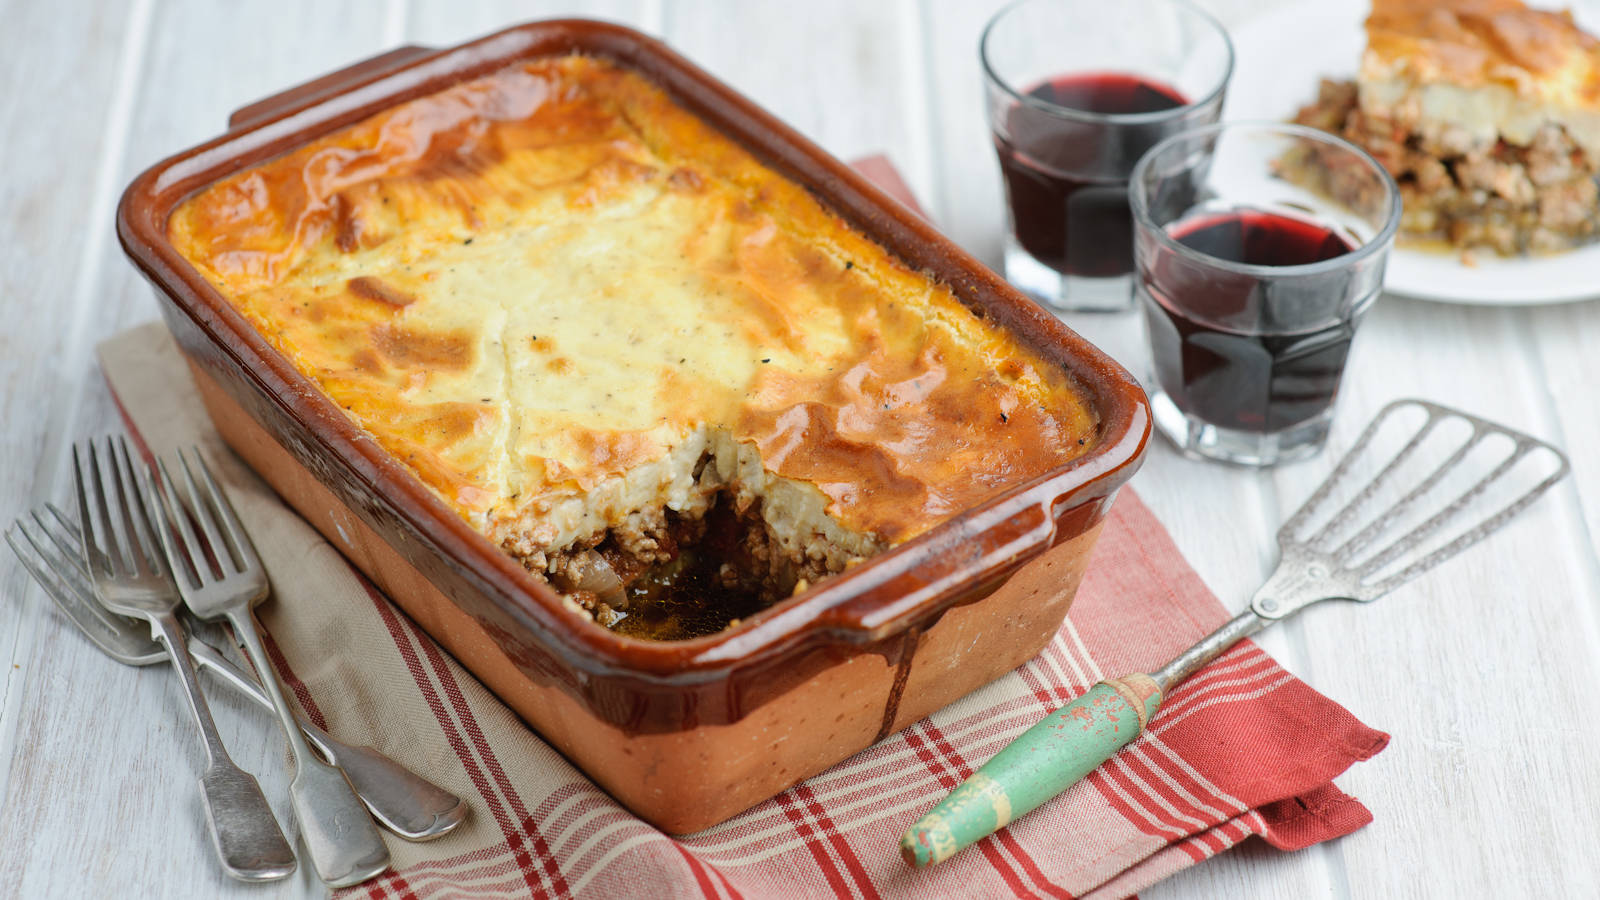 Mouthwatering Oven-Baked Moussaka on a Tray Wallpaper